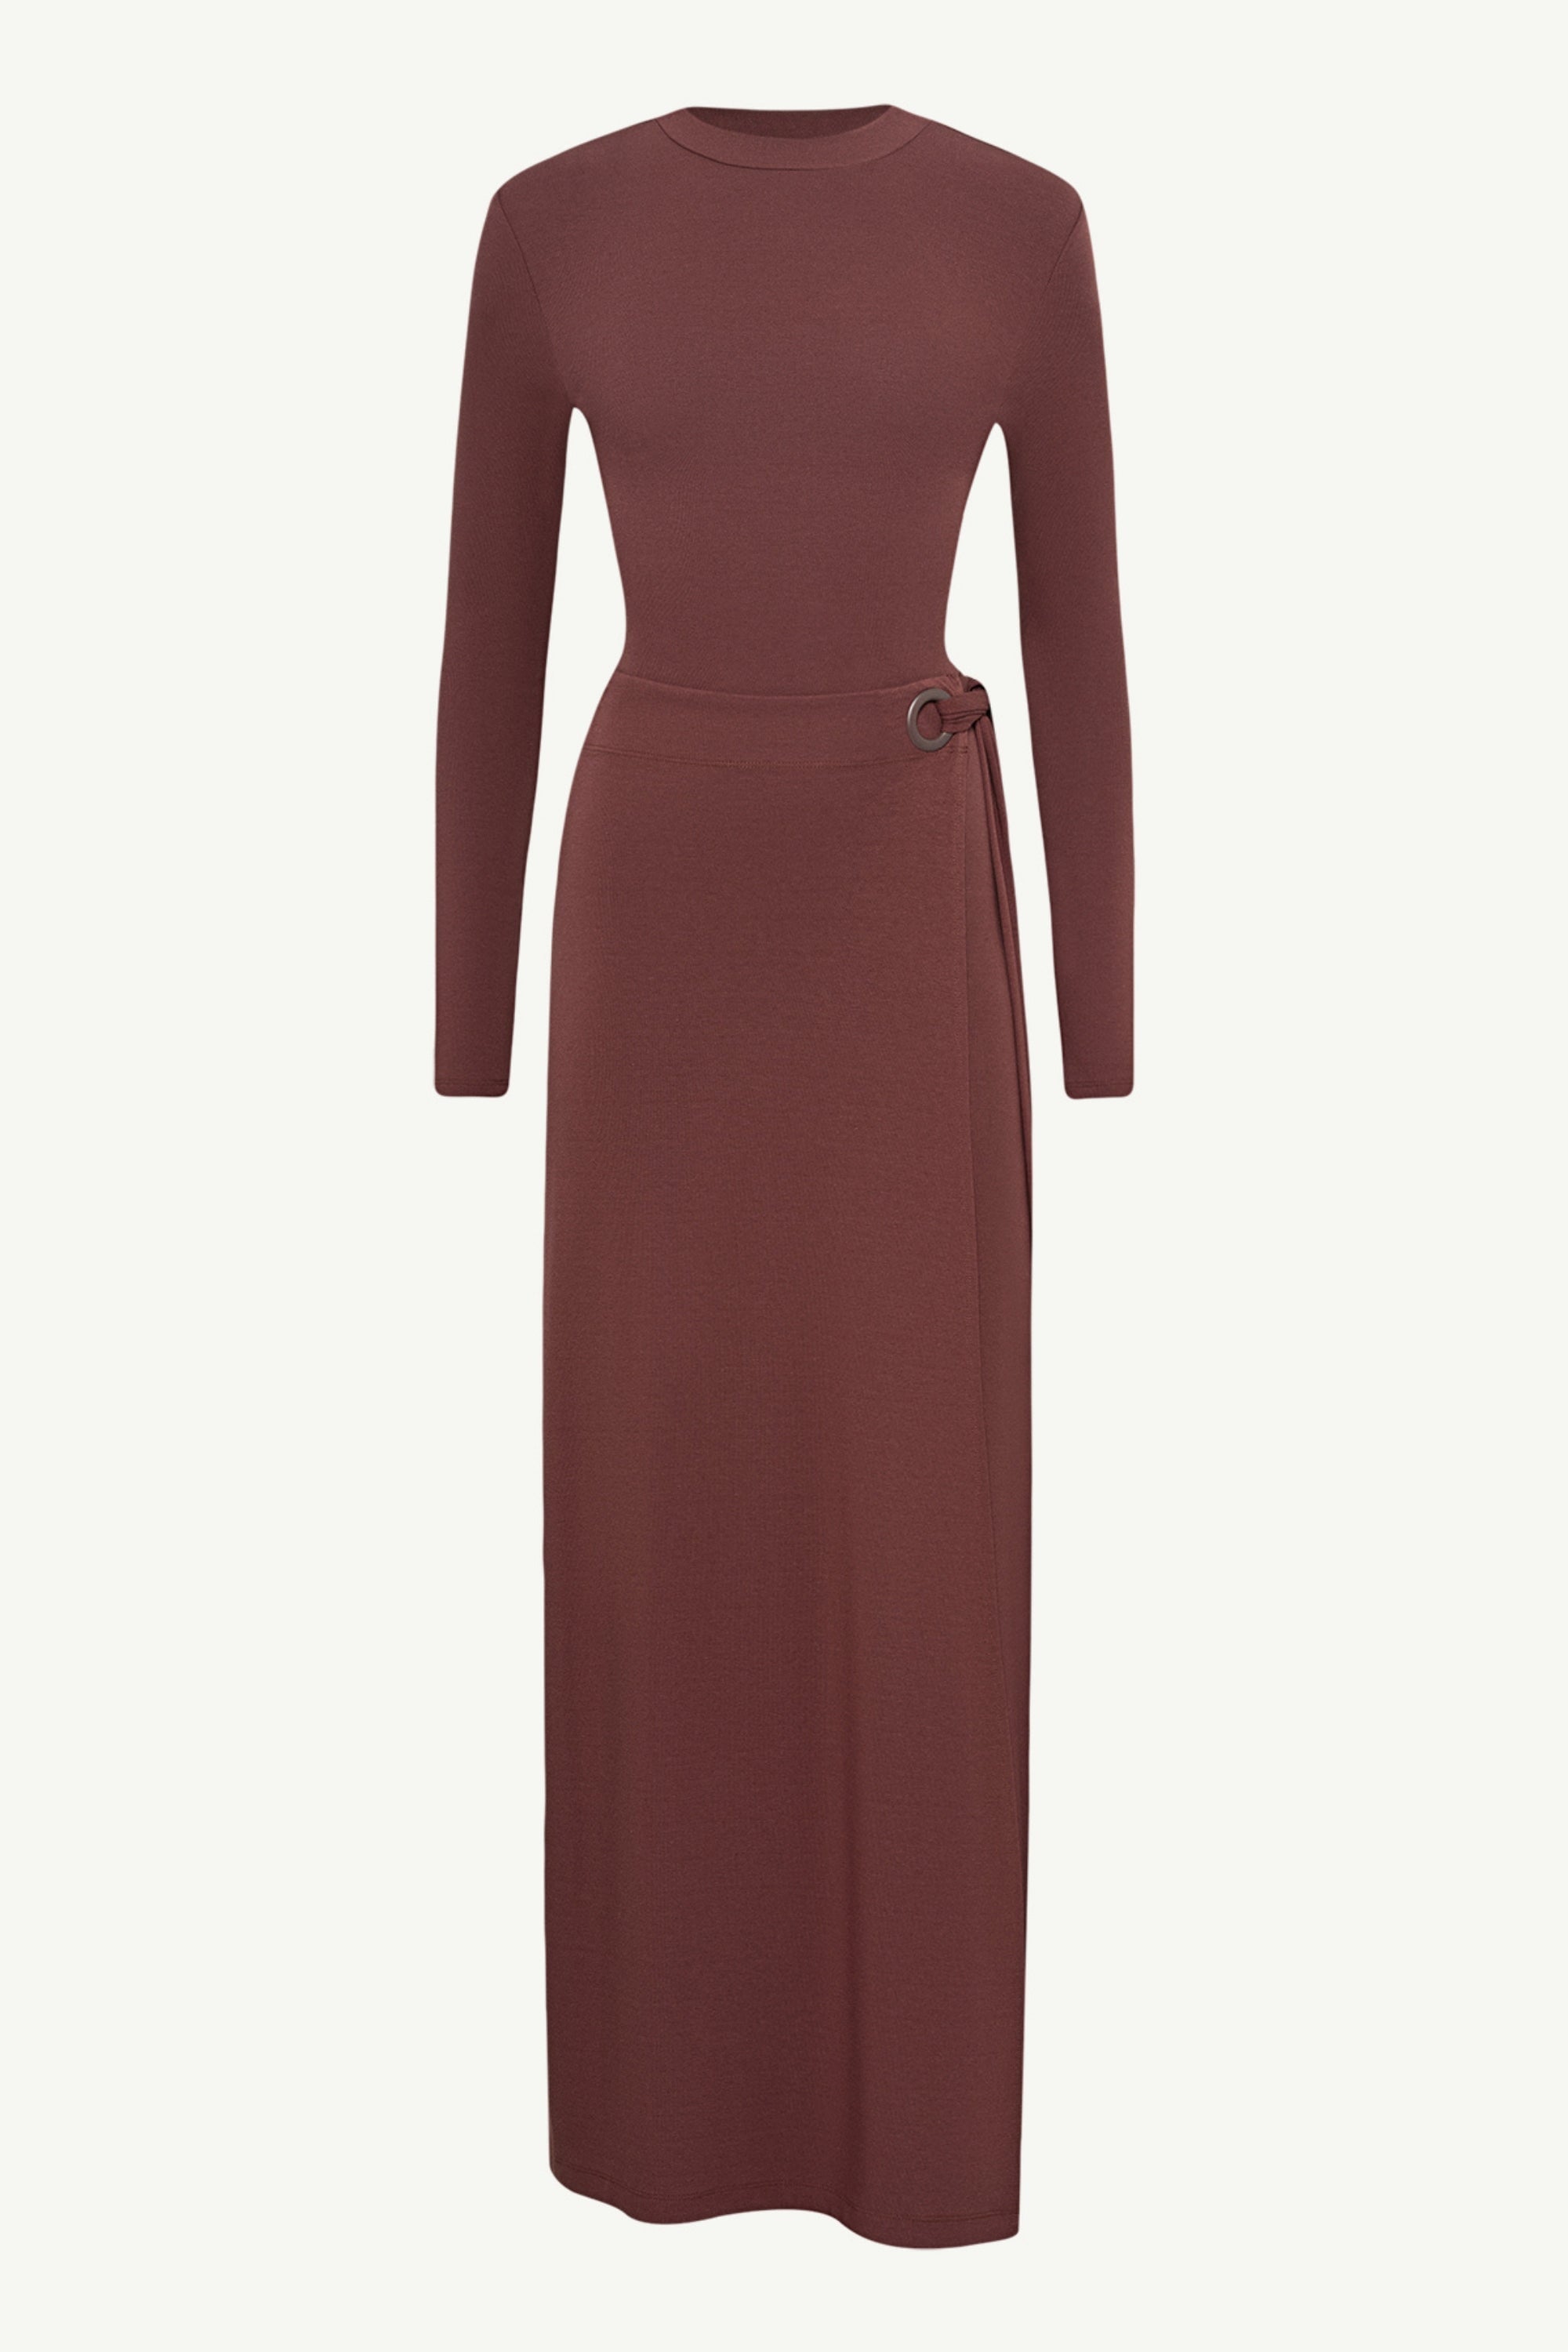 Melissa Jersey Maxi Dress with Wrap Skirt - Brown Clothing Veiled 